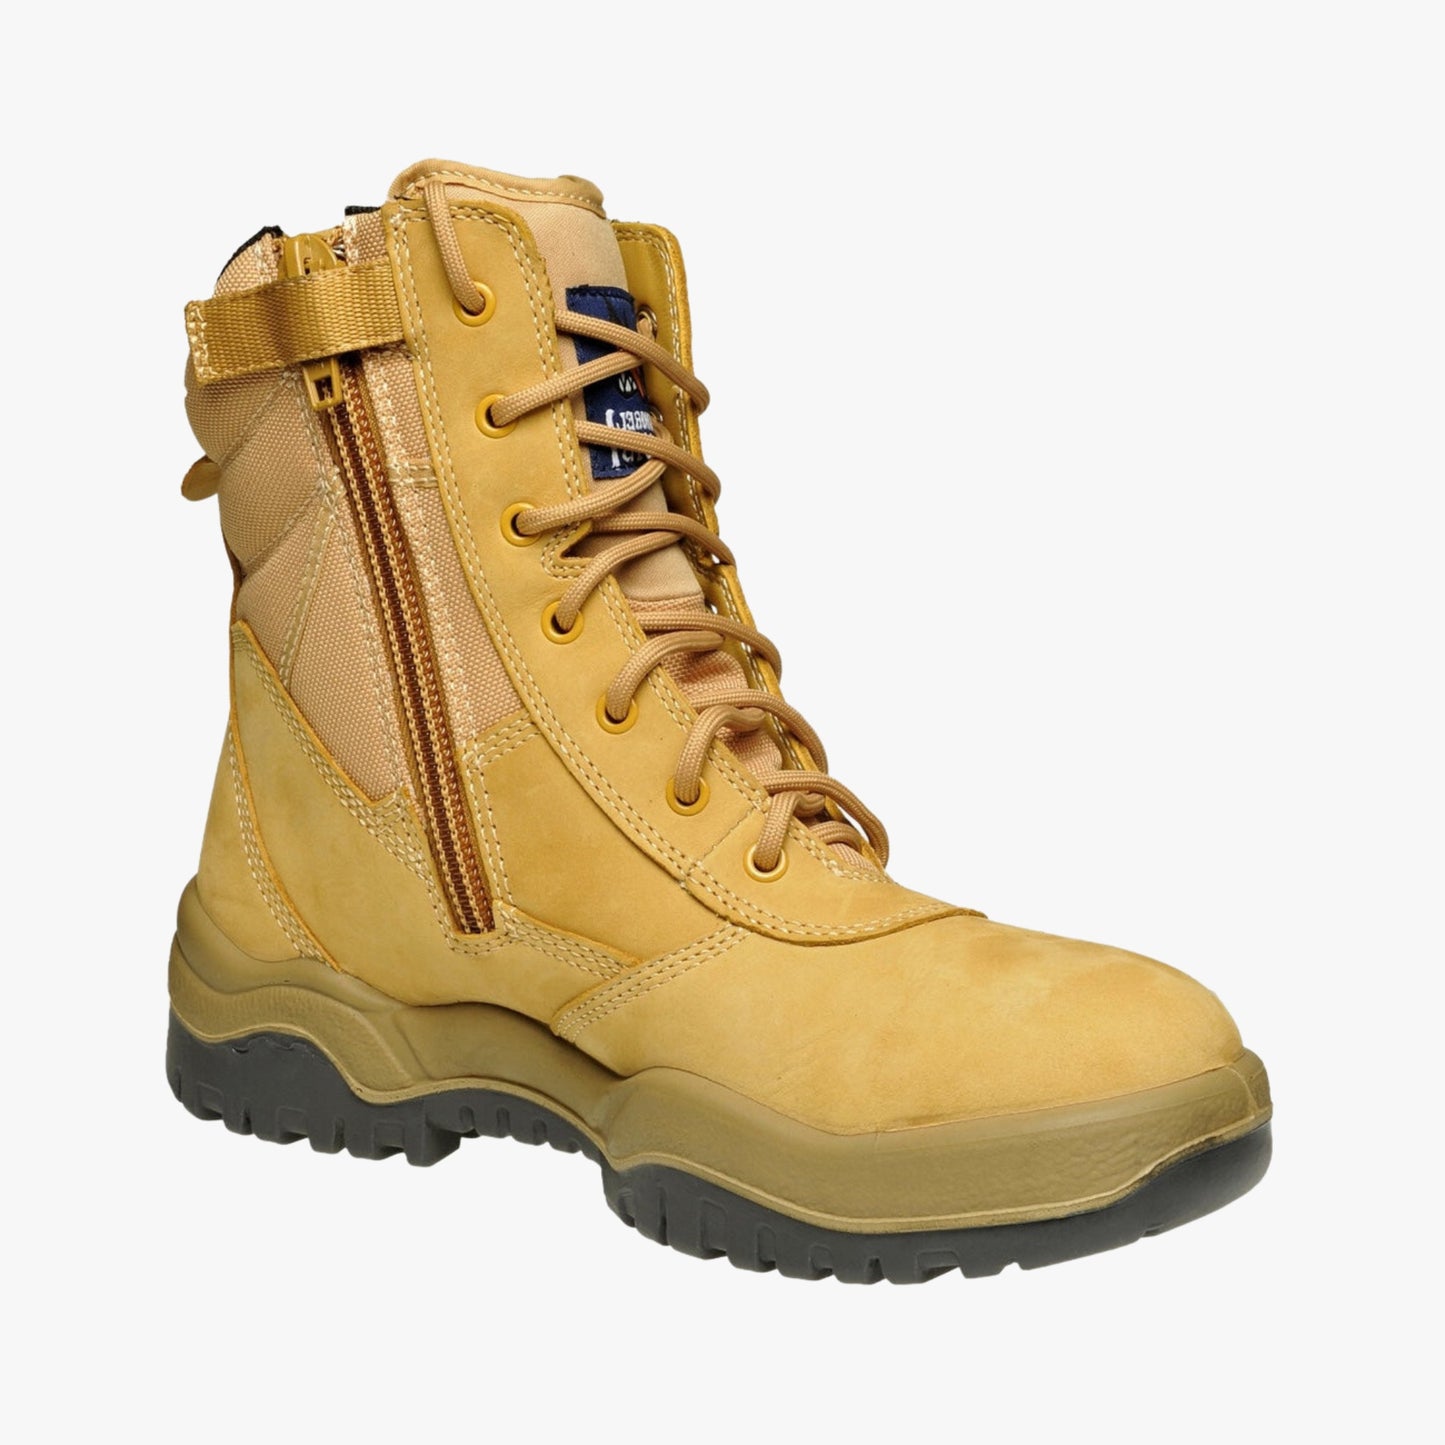 MONGREL - Lace Up Zip Sider 8" Safety Boot - Wheat